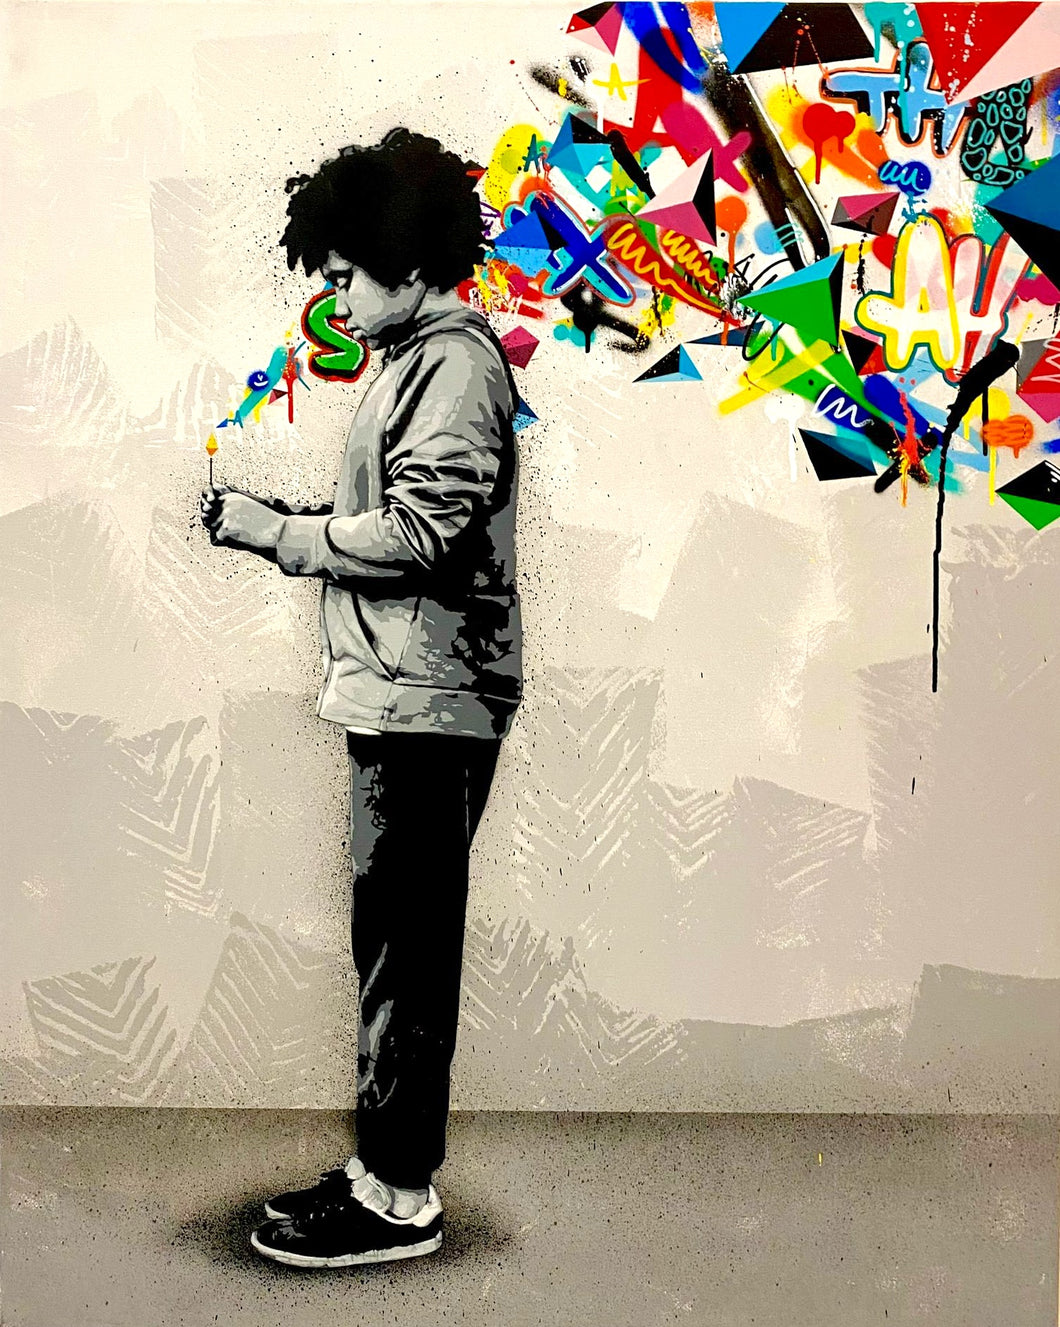 MARTIN WHATSON X HAMA WOODS - HOPE FOR A GENERATION